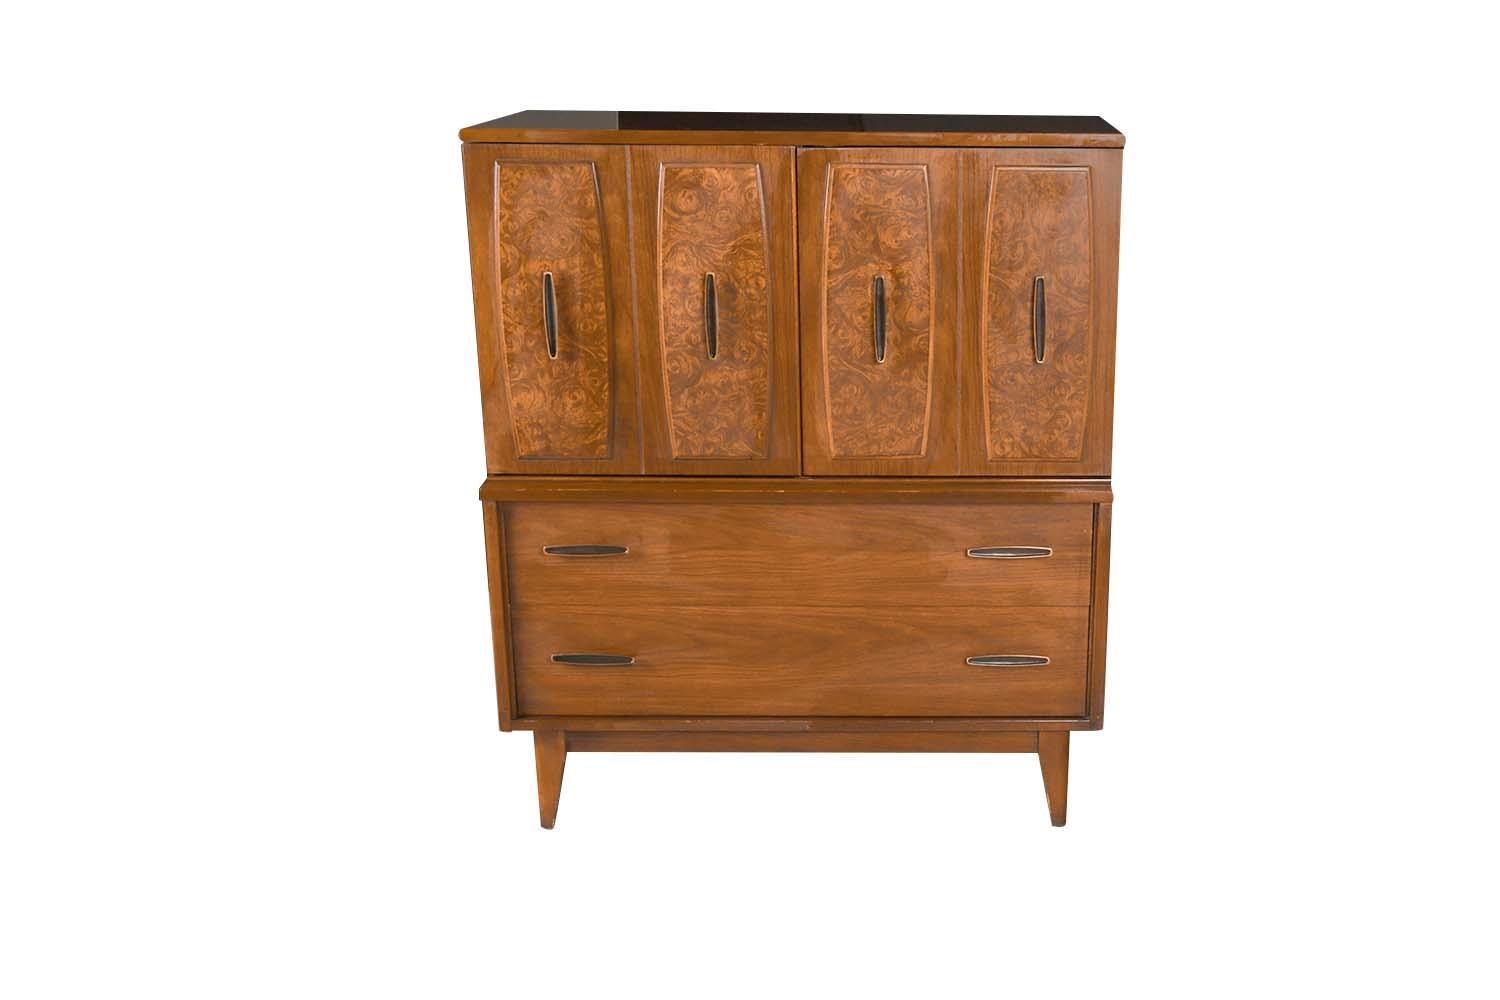 A classic Mid Century Modern walnut tallboy dresser with burled walnut center doors by a division of Broyhill, “Lenoir Furniture Company”. A handsome example of American craftsmanship. Stunning walnut highboy dresser with sculptural accents svelte